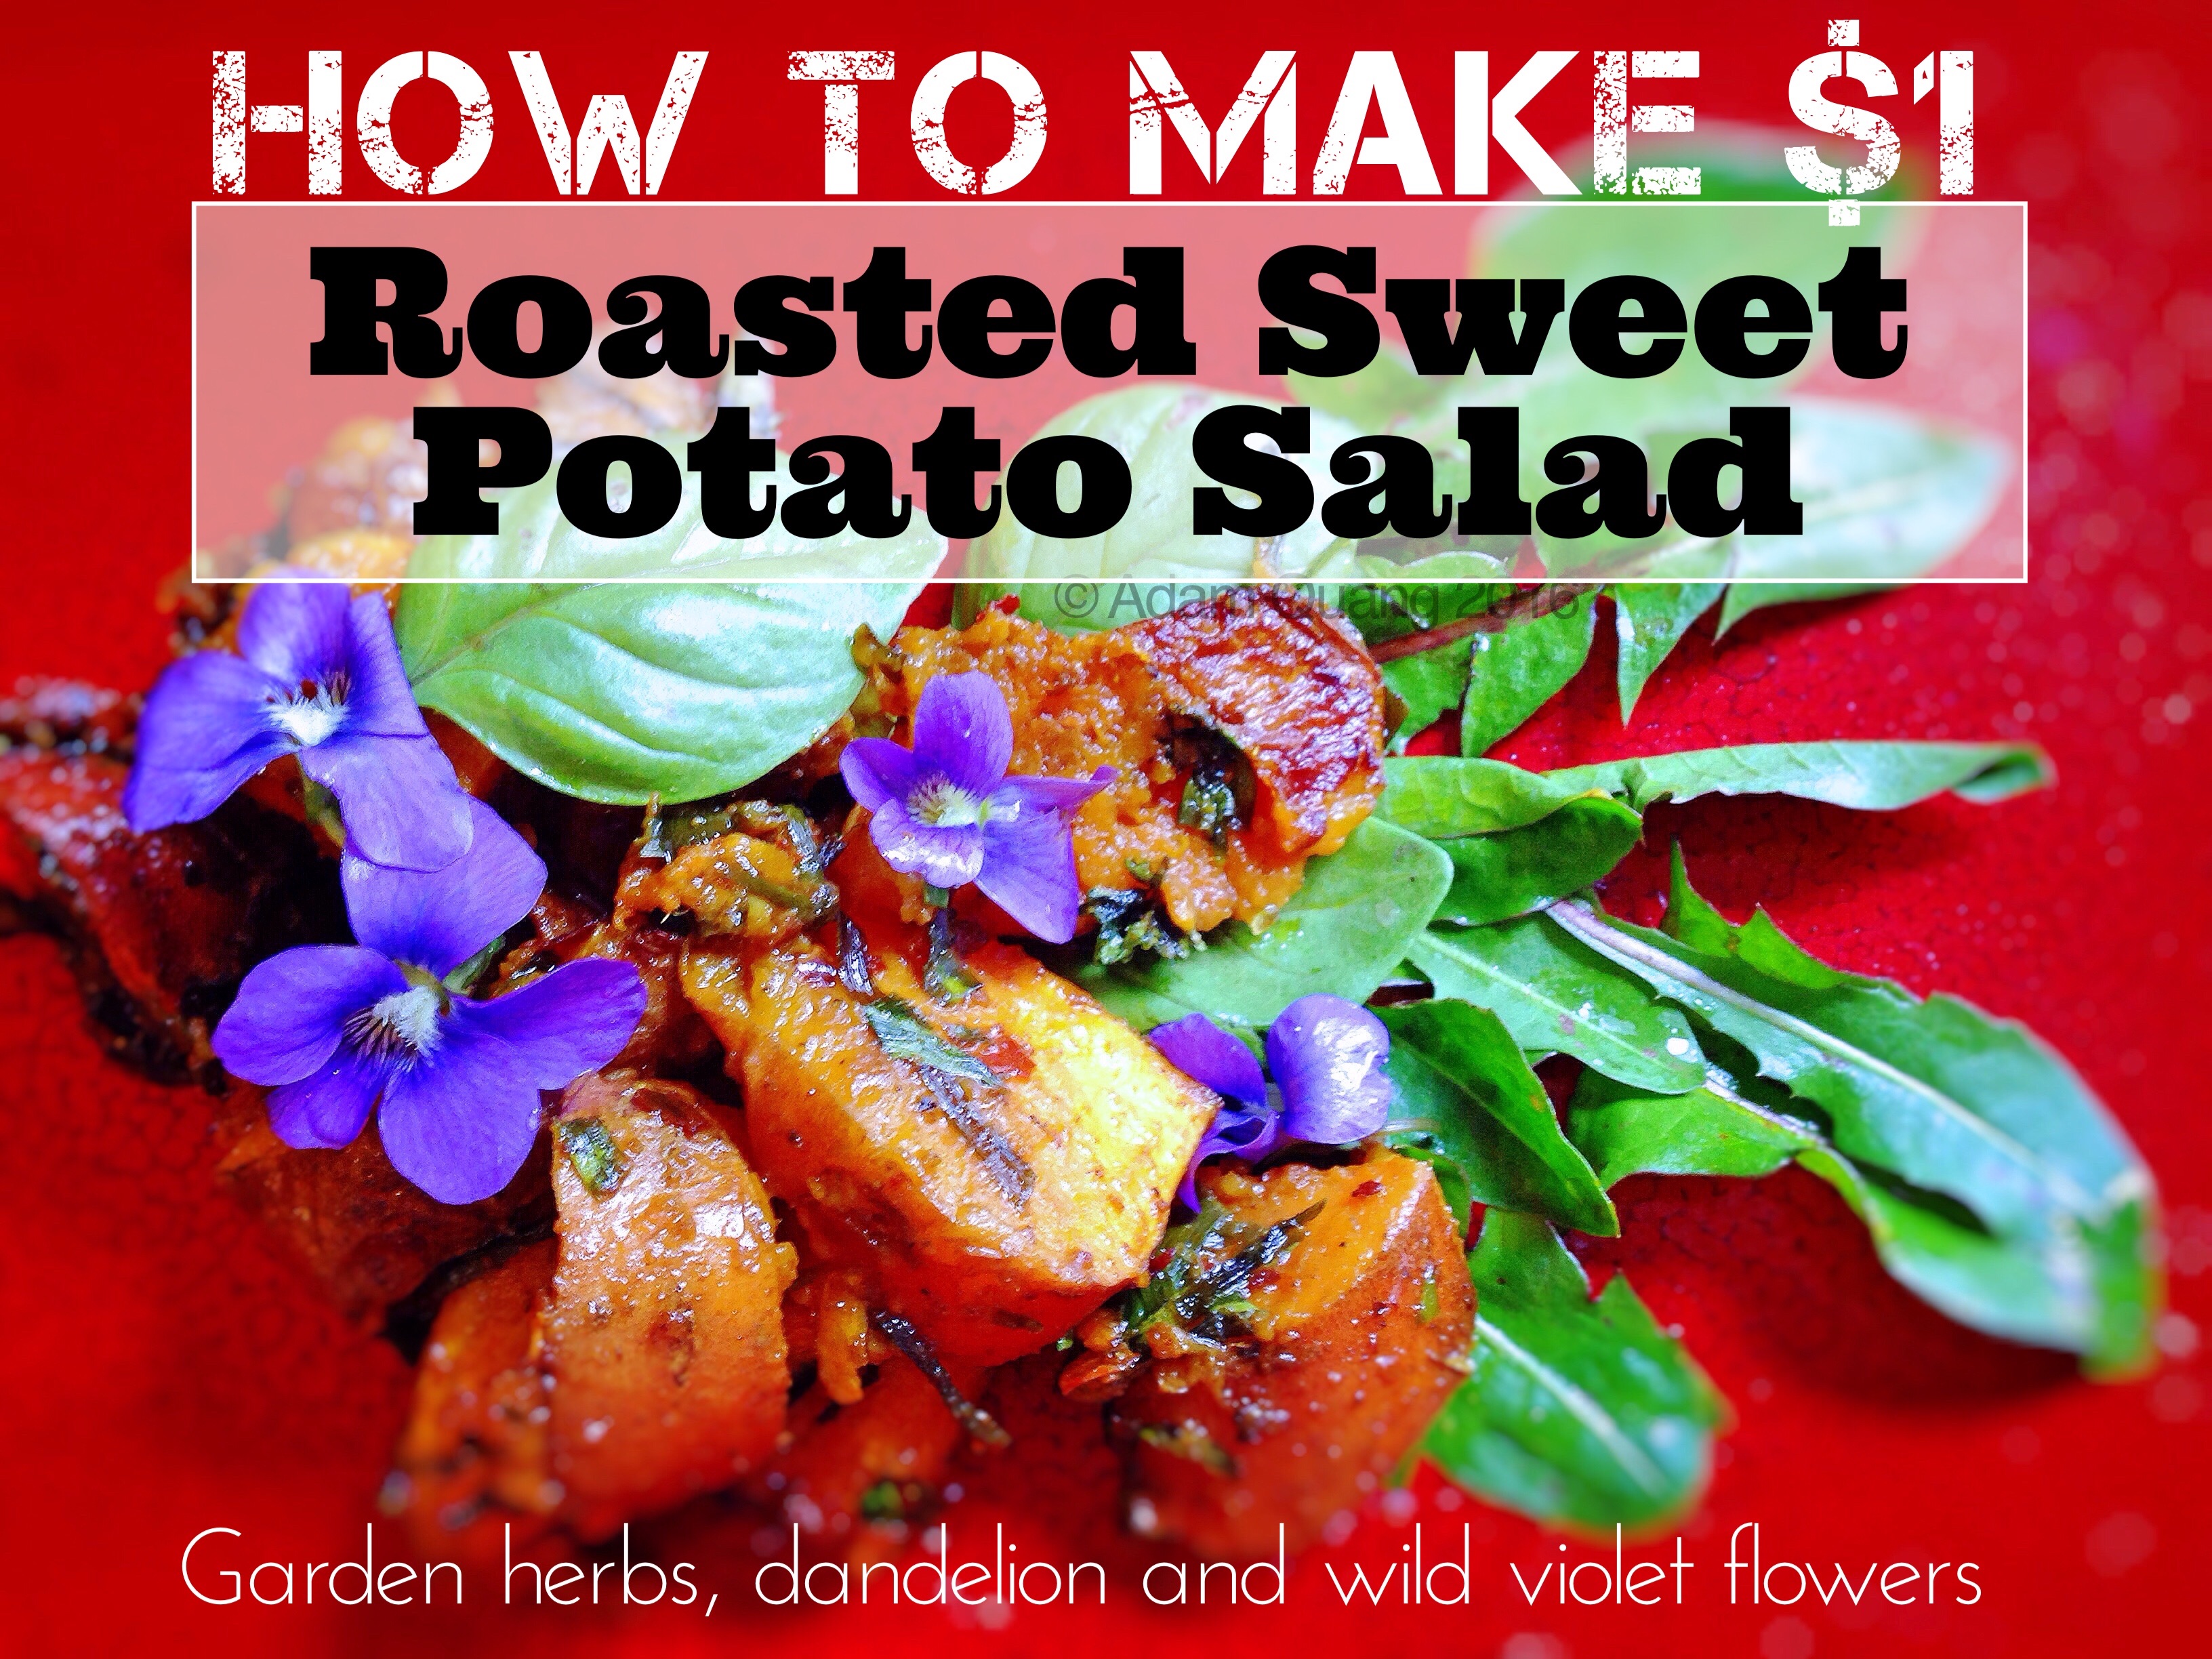 How To Make Roasted Sweet Potato Salad with Garden Herbs